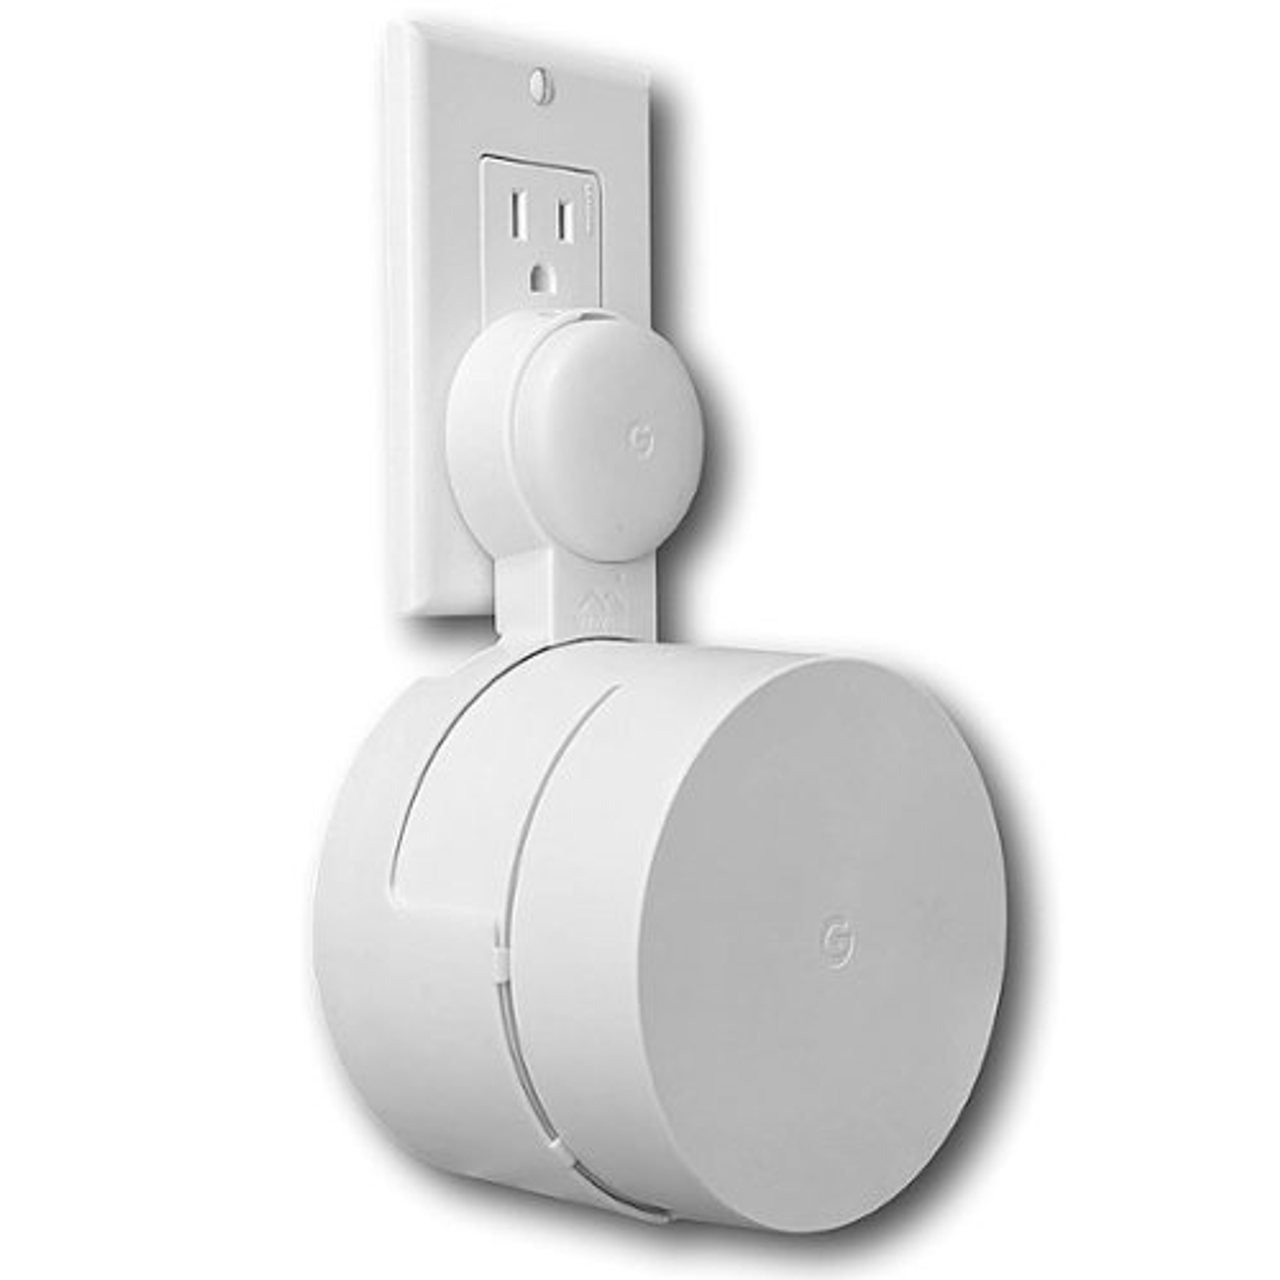 Mount Genie - Outlet Mount for Google Wifi AC1200 - Round Plug - 1-pack